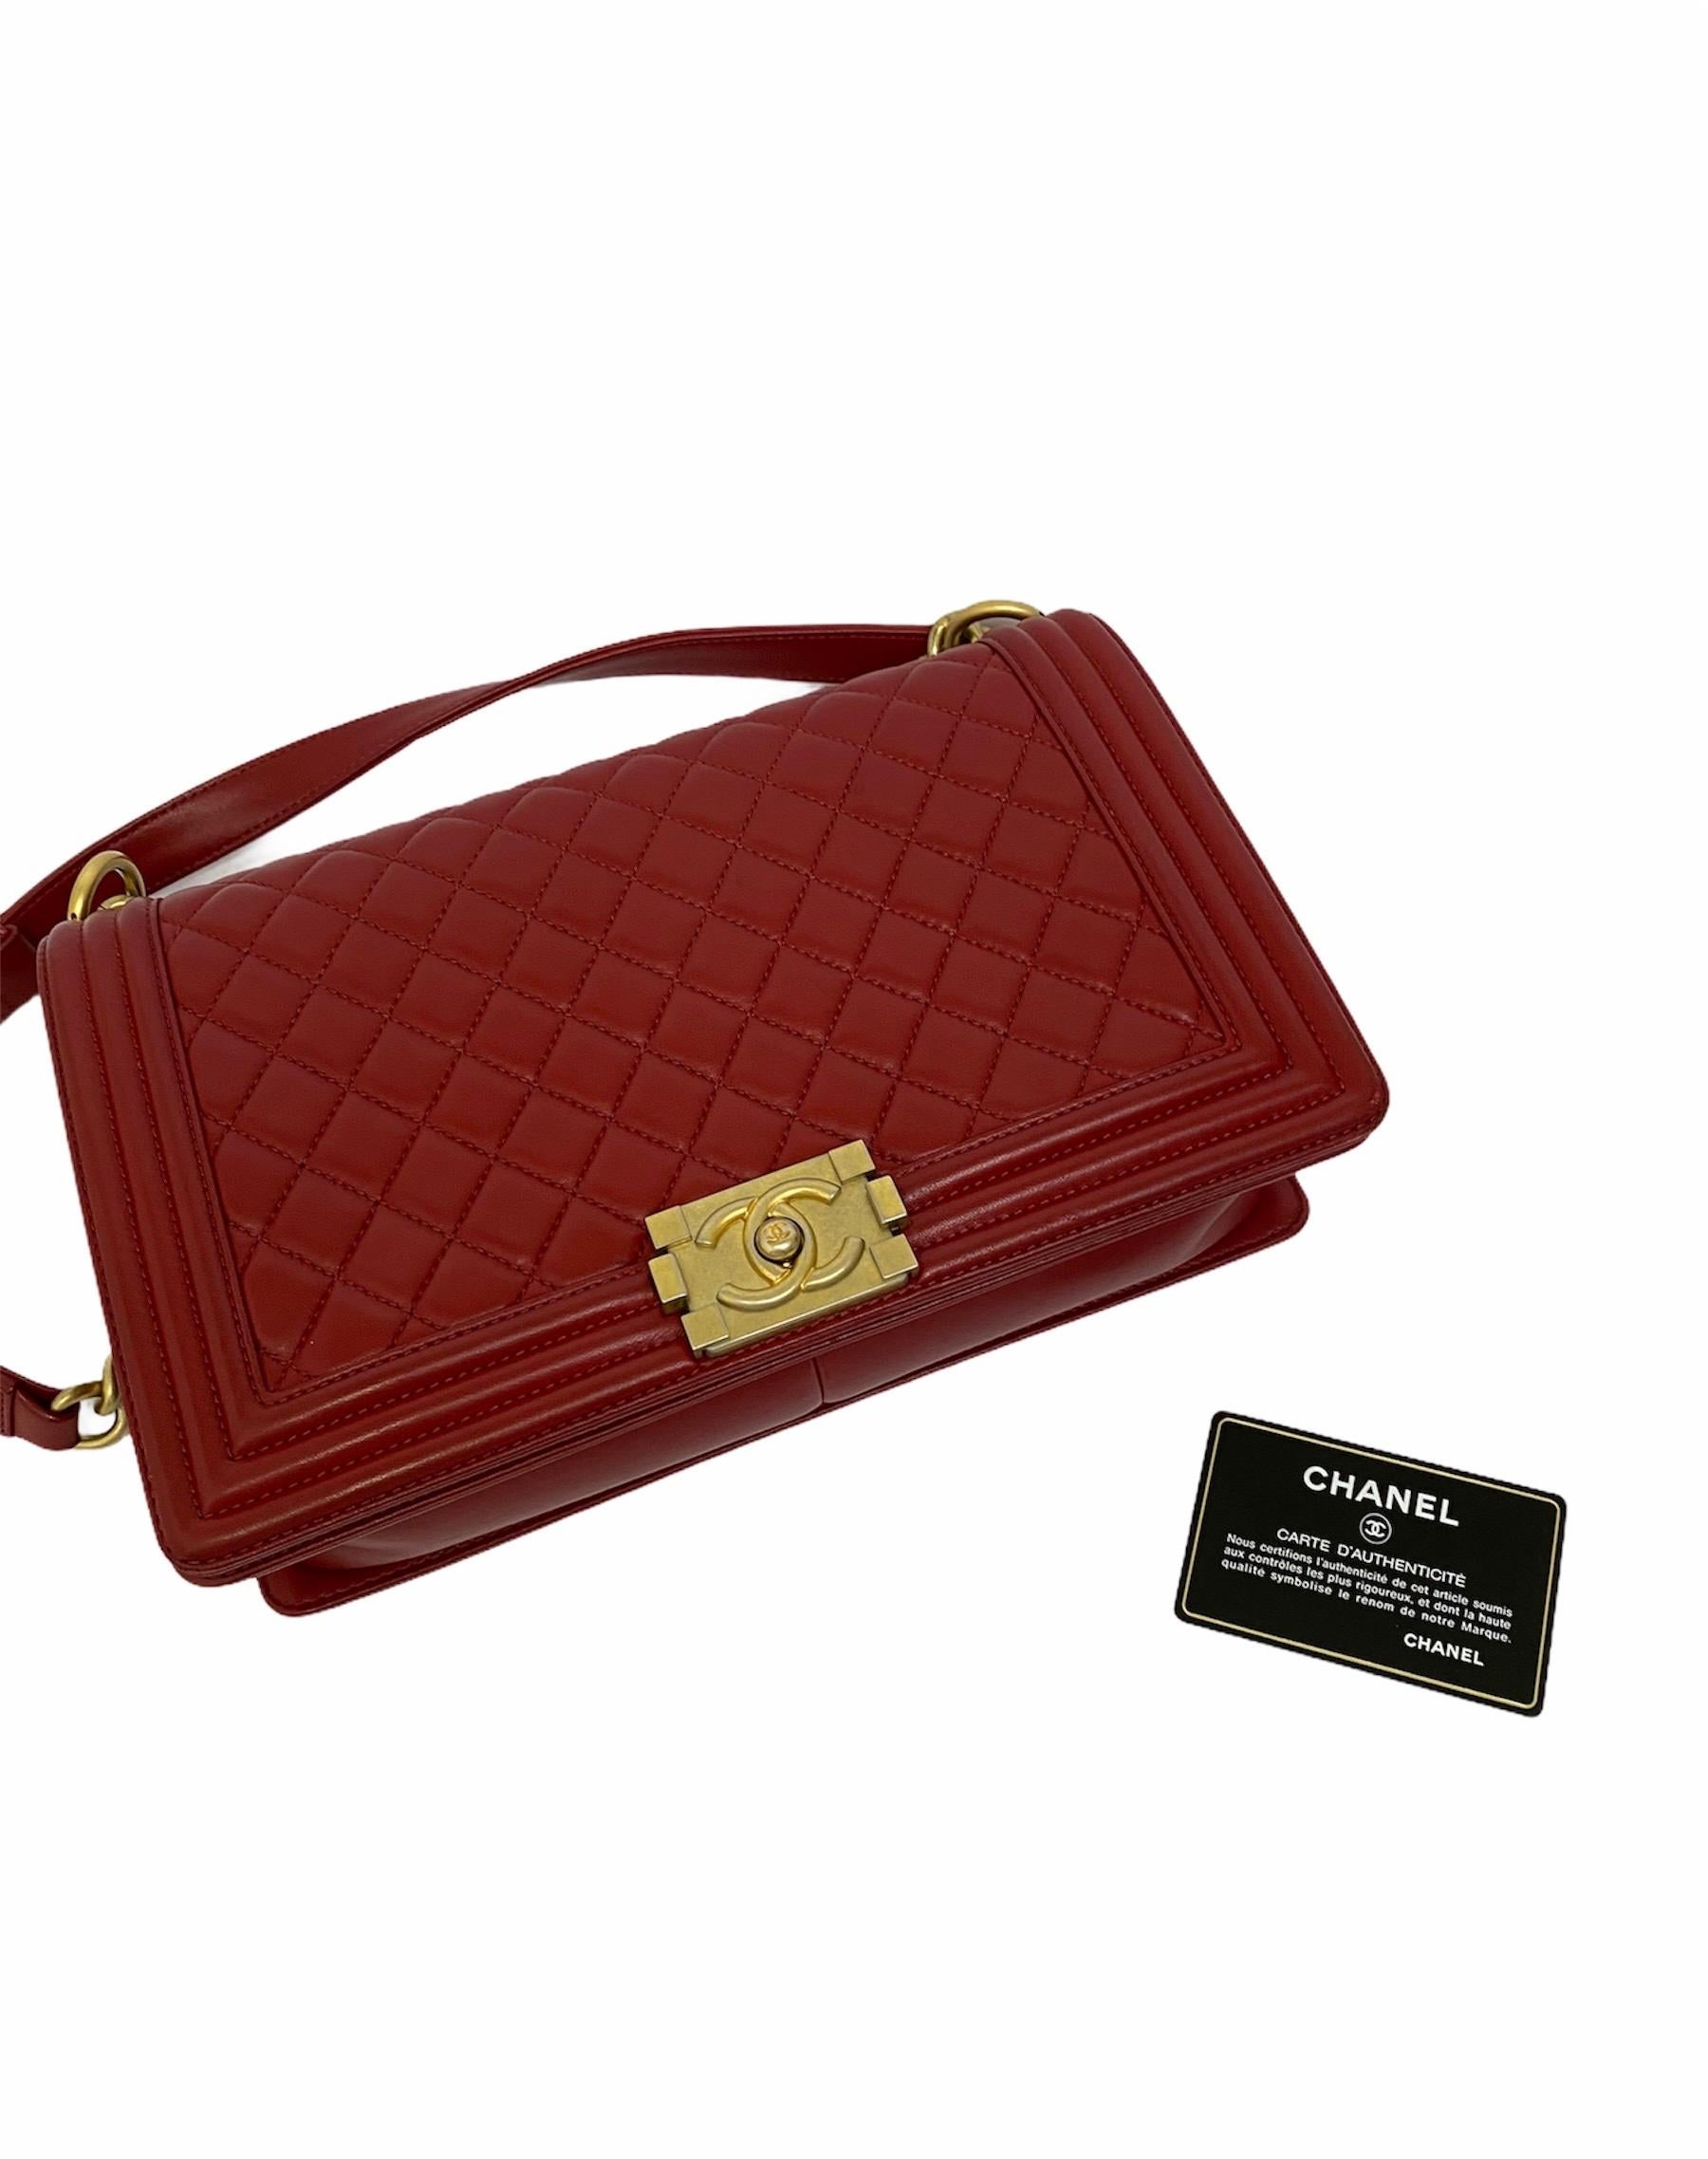 Chanel Red Leather Boy Bag 6